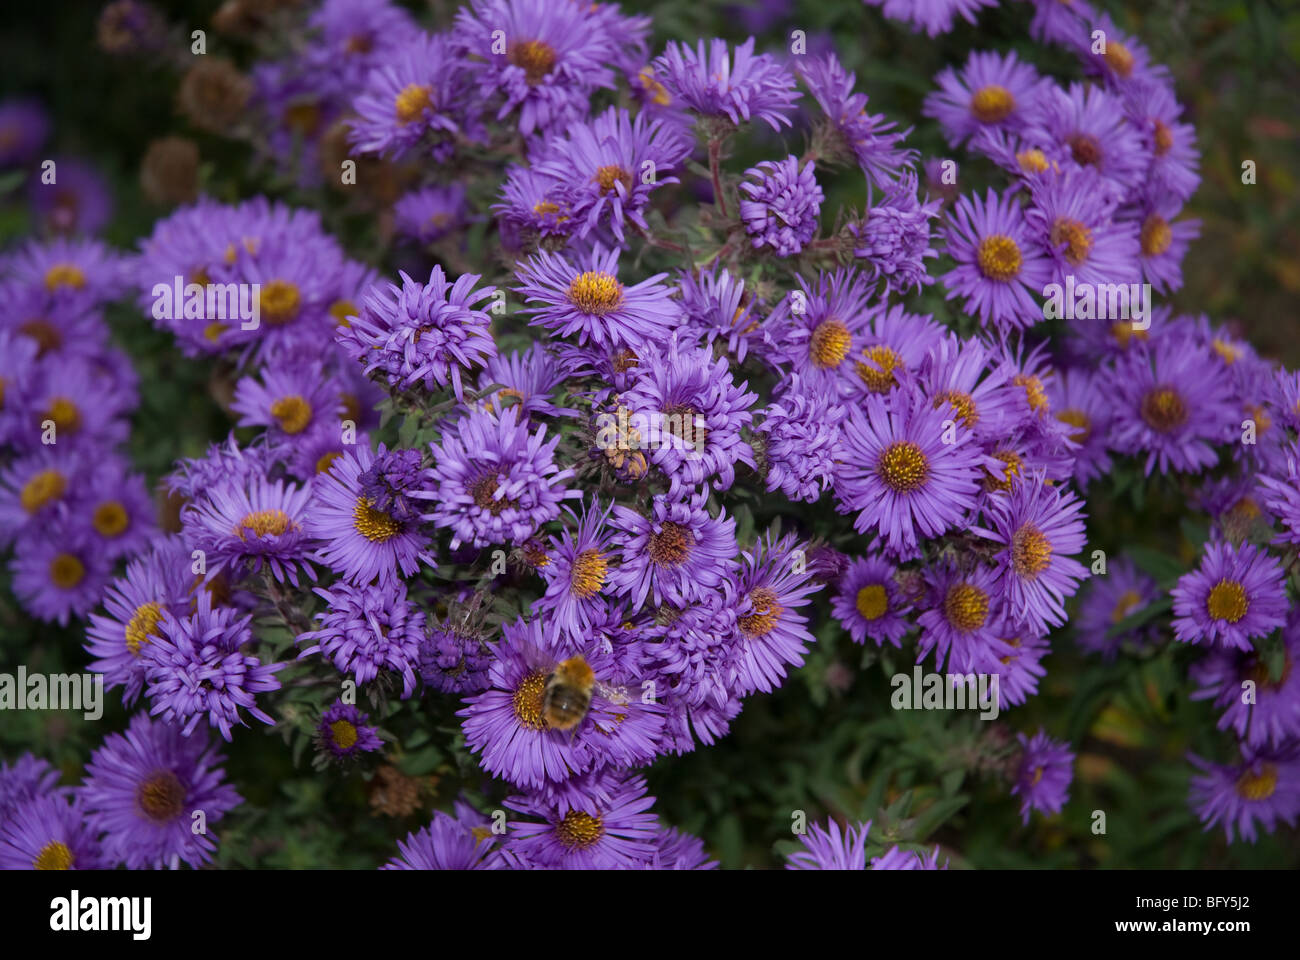 Symphyotrichum Novae Angliae Asteraceae Or New England Aster With Stock Photo Alamy